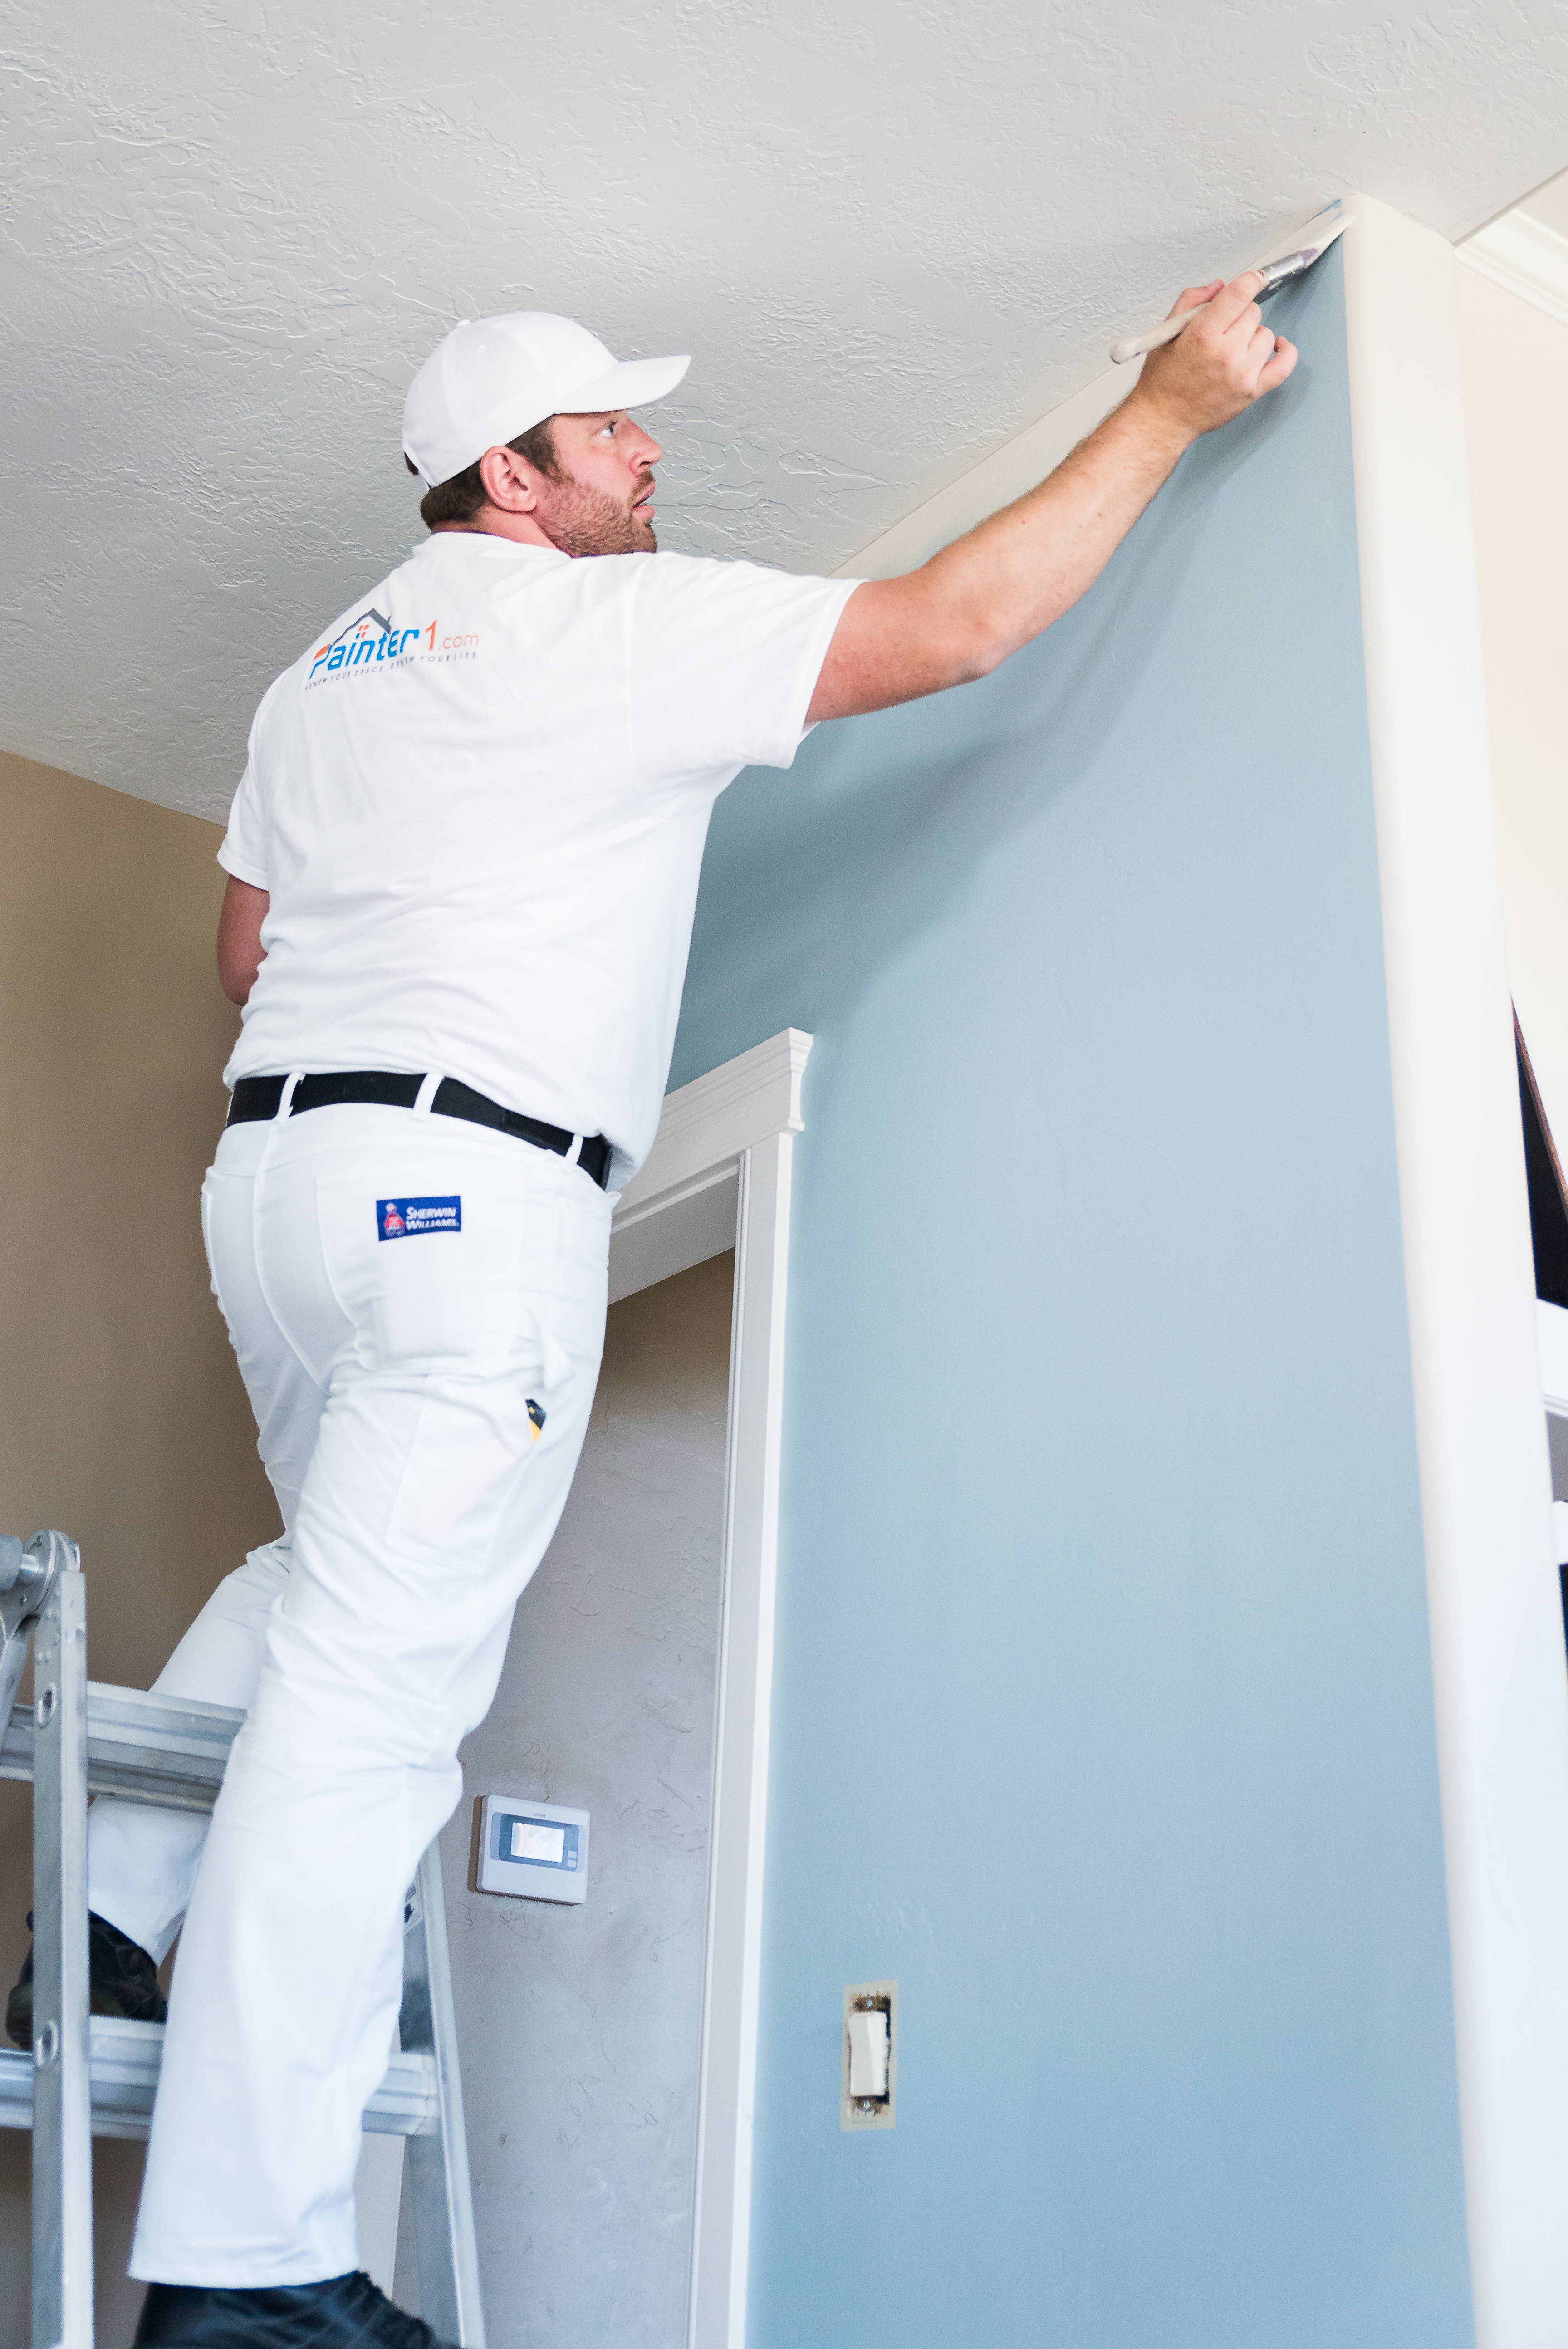 Painter1 has top rated professional painters near you.